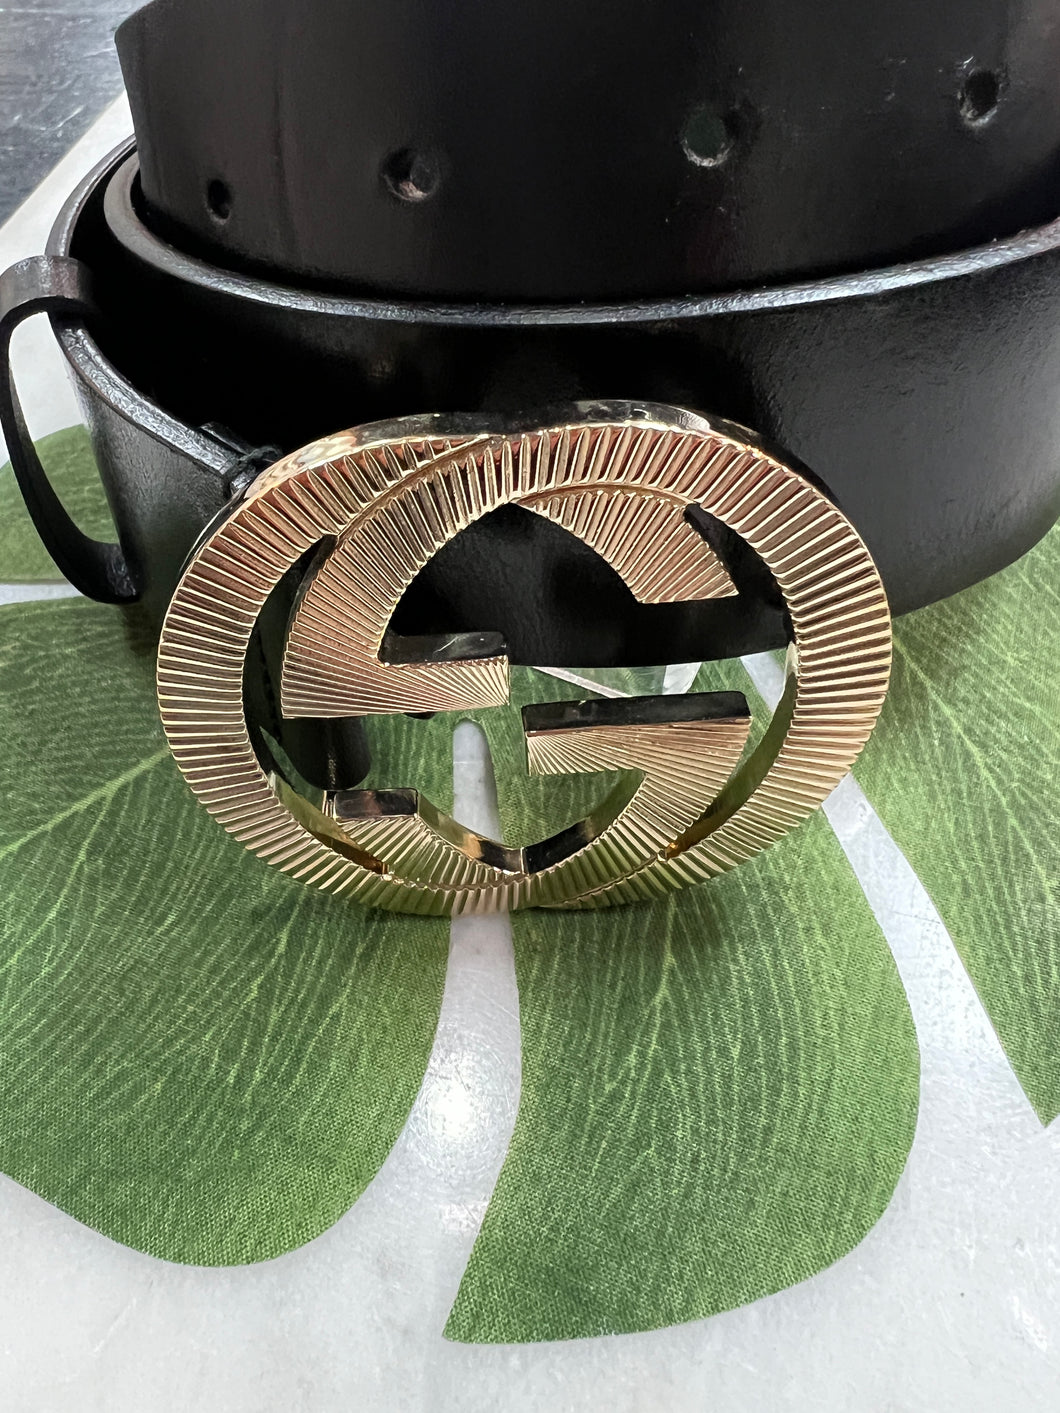 Authentic Gucci Black Belt with GG Gucci Buckle